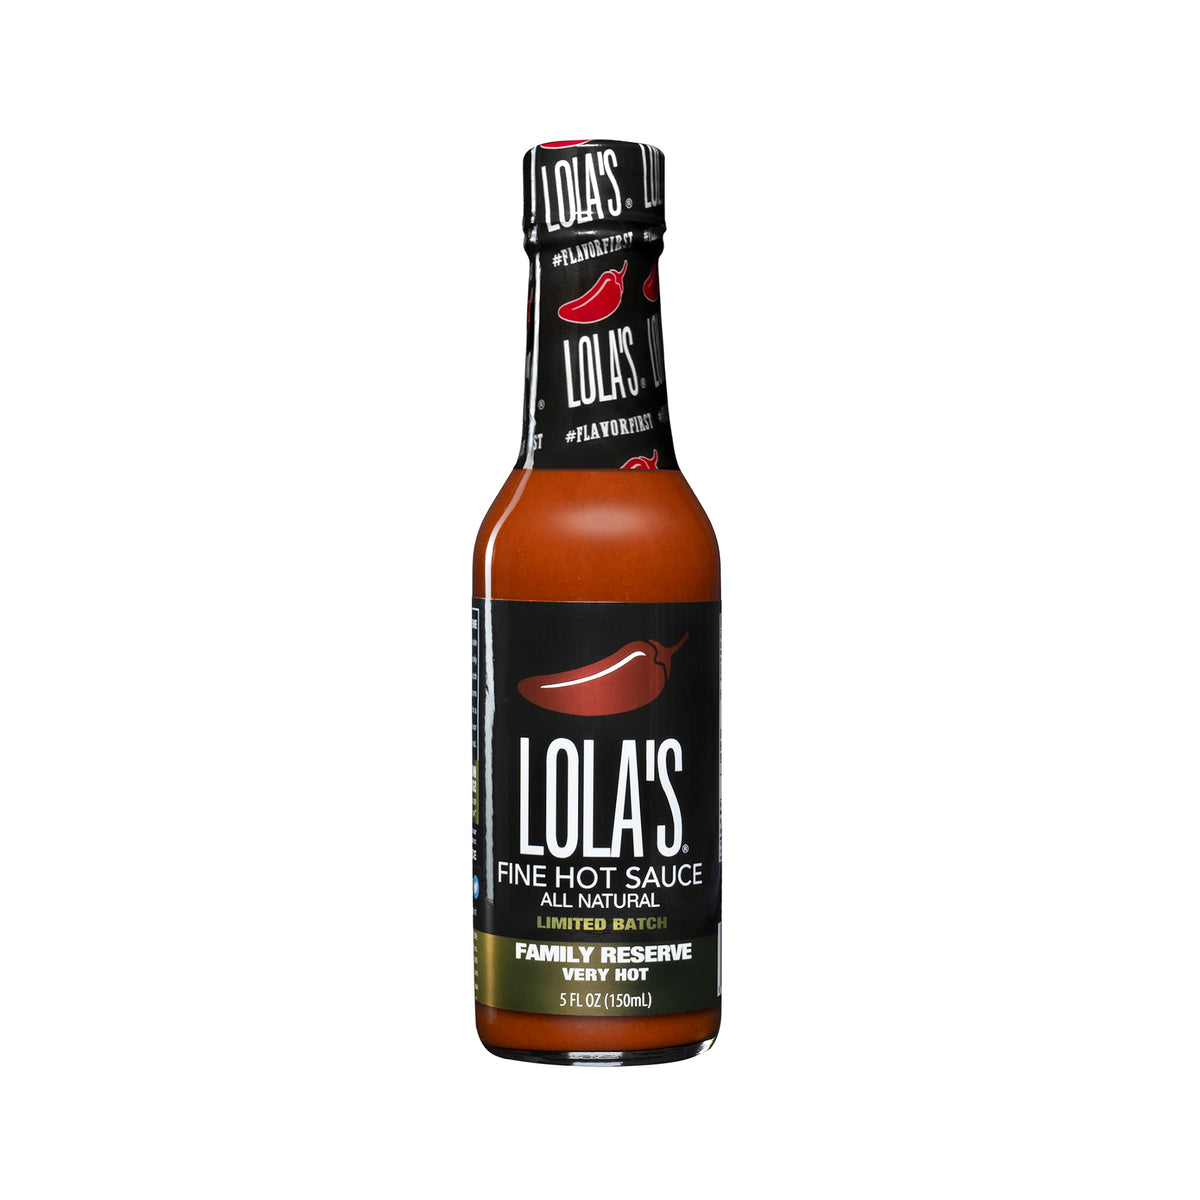 Lola's "Game Day" Bundle: A bottle of hot sauce, Bloody Mary mix, and seasoning for a spicy kick.